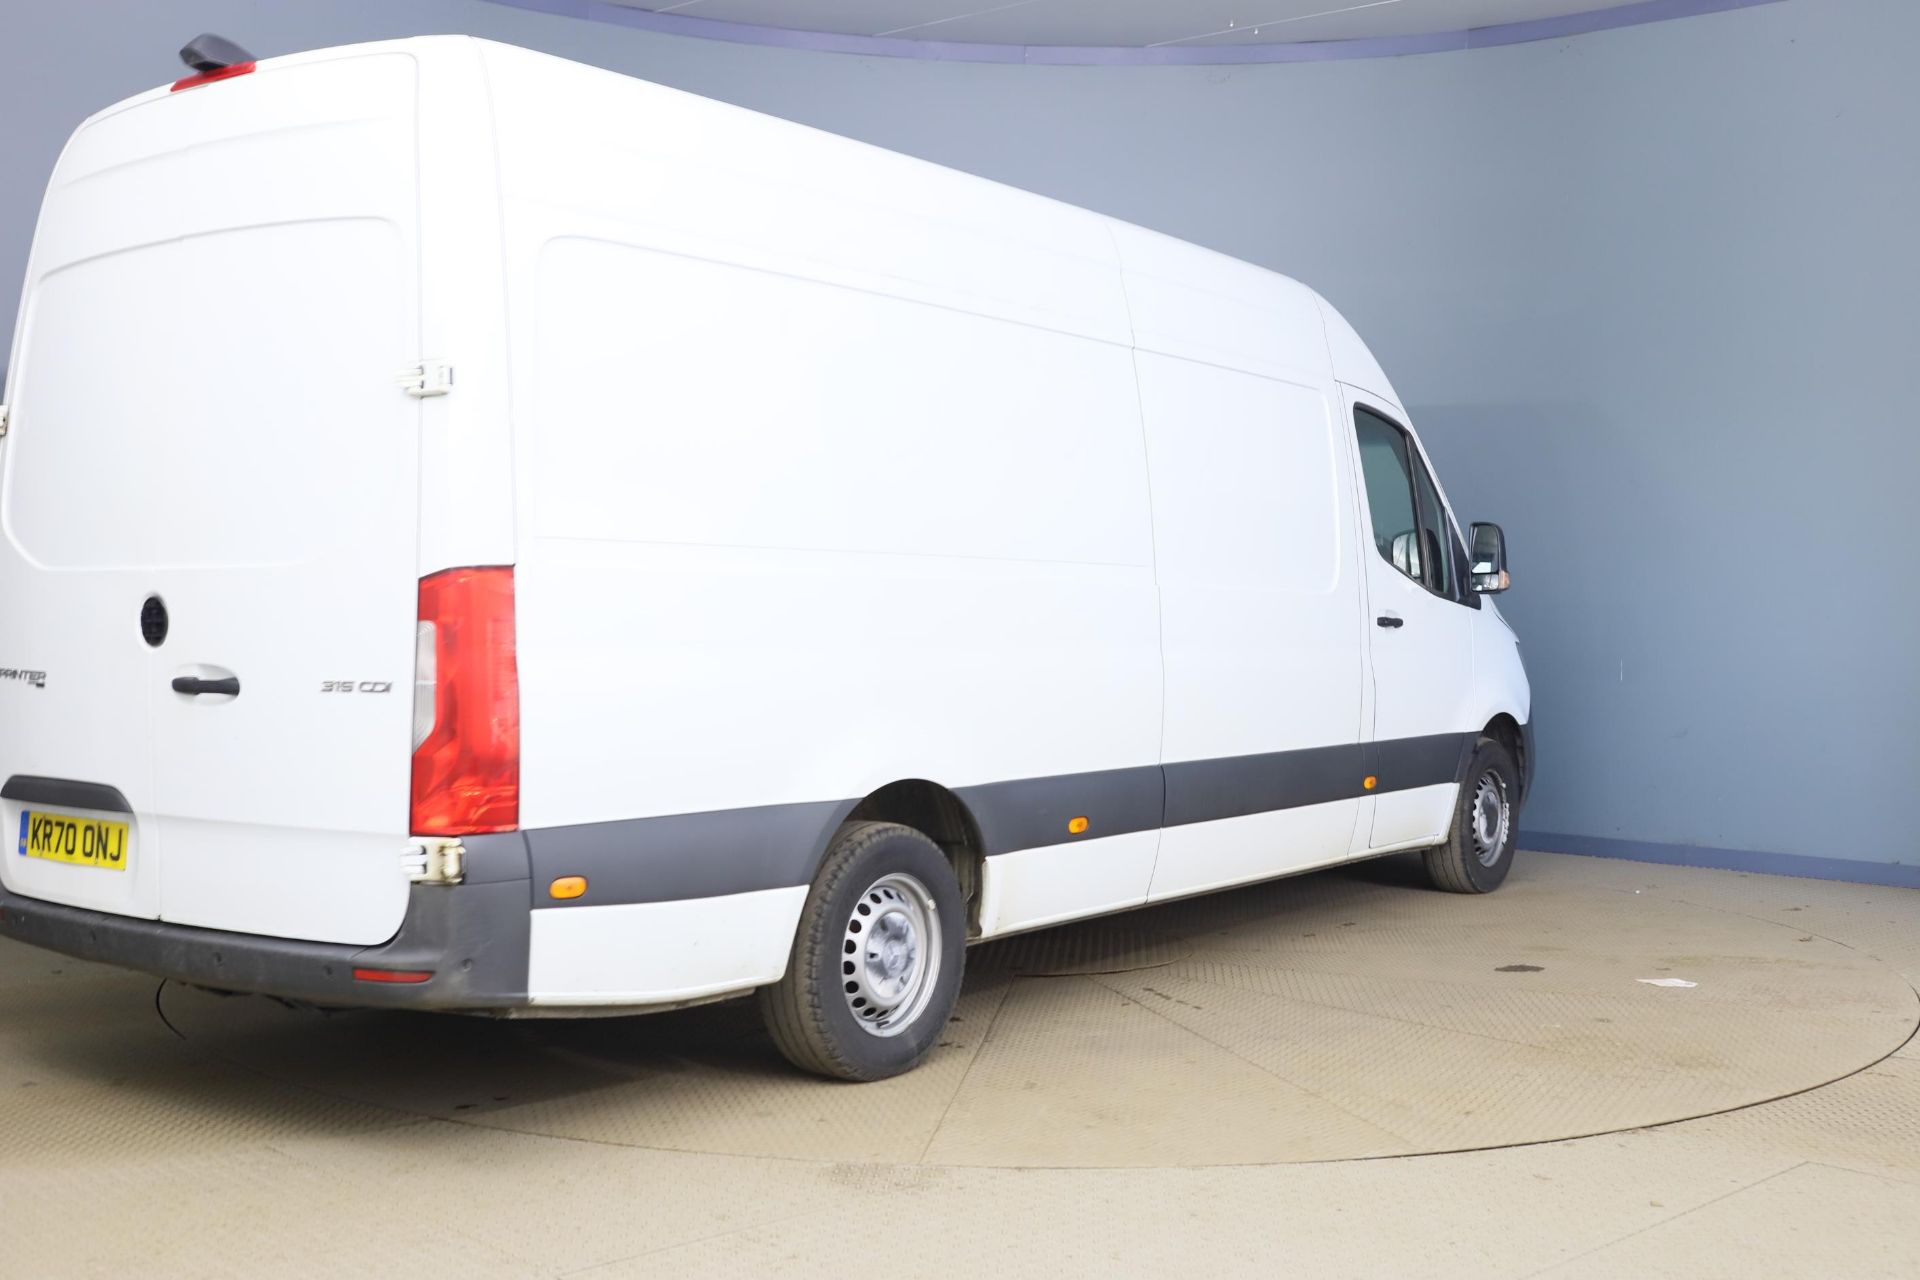 MERCEDES SPRINTER 315CDI "LWB" HIGH TOP "70 REG" 2021 MODEL - 1 Owner From New - Euro 6 - Image 5 of 12